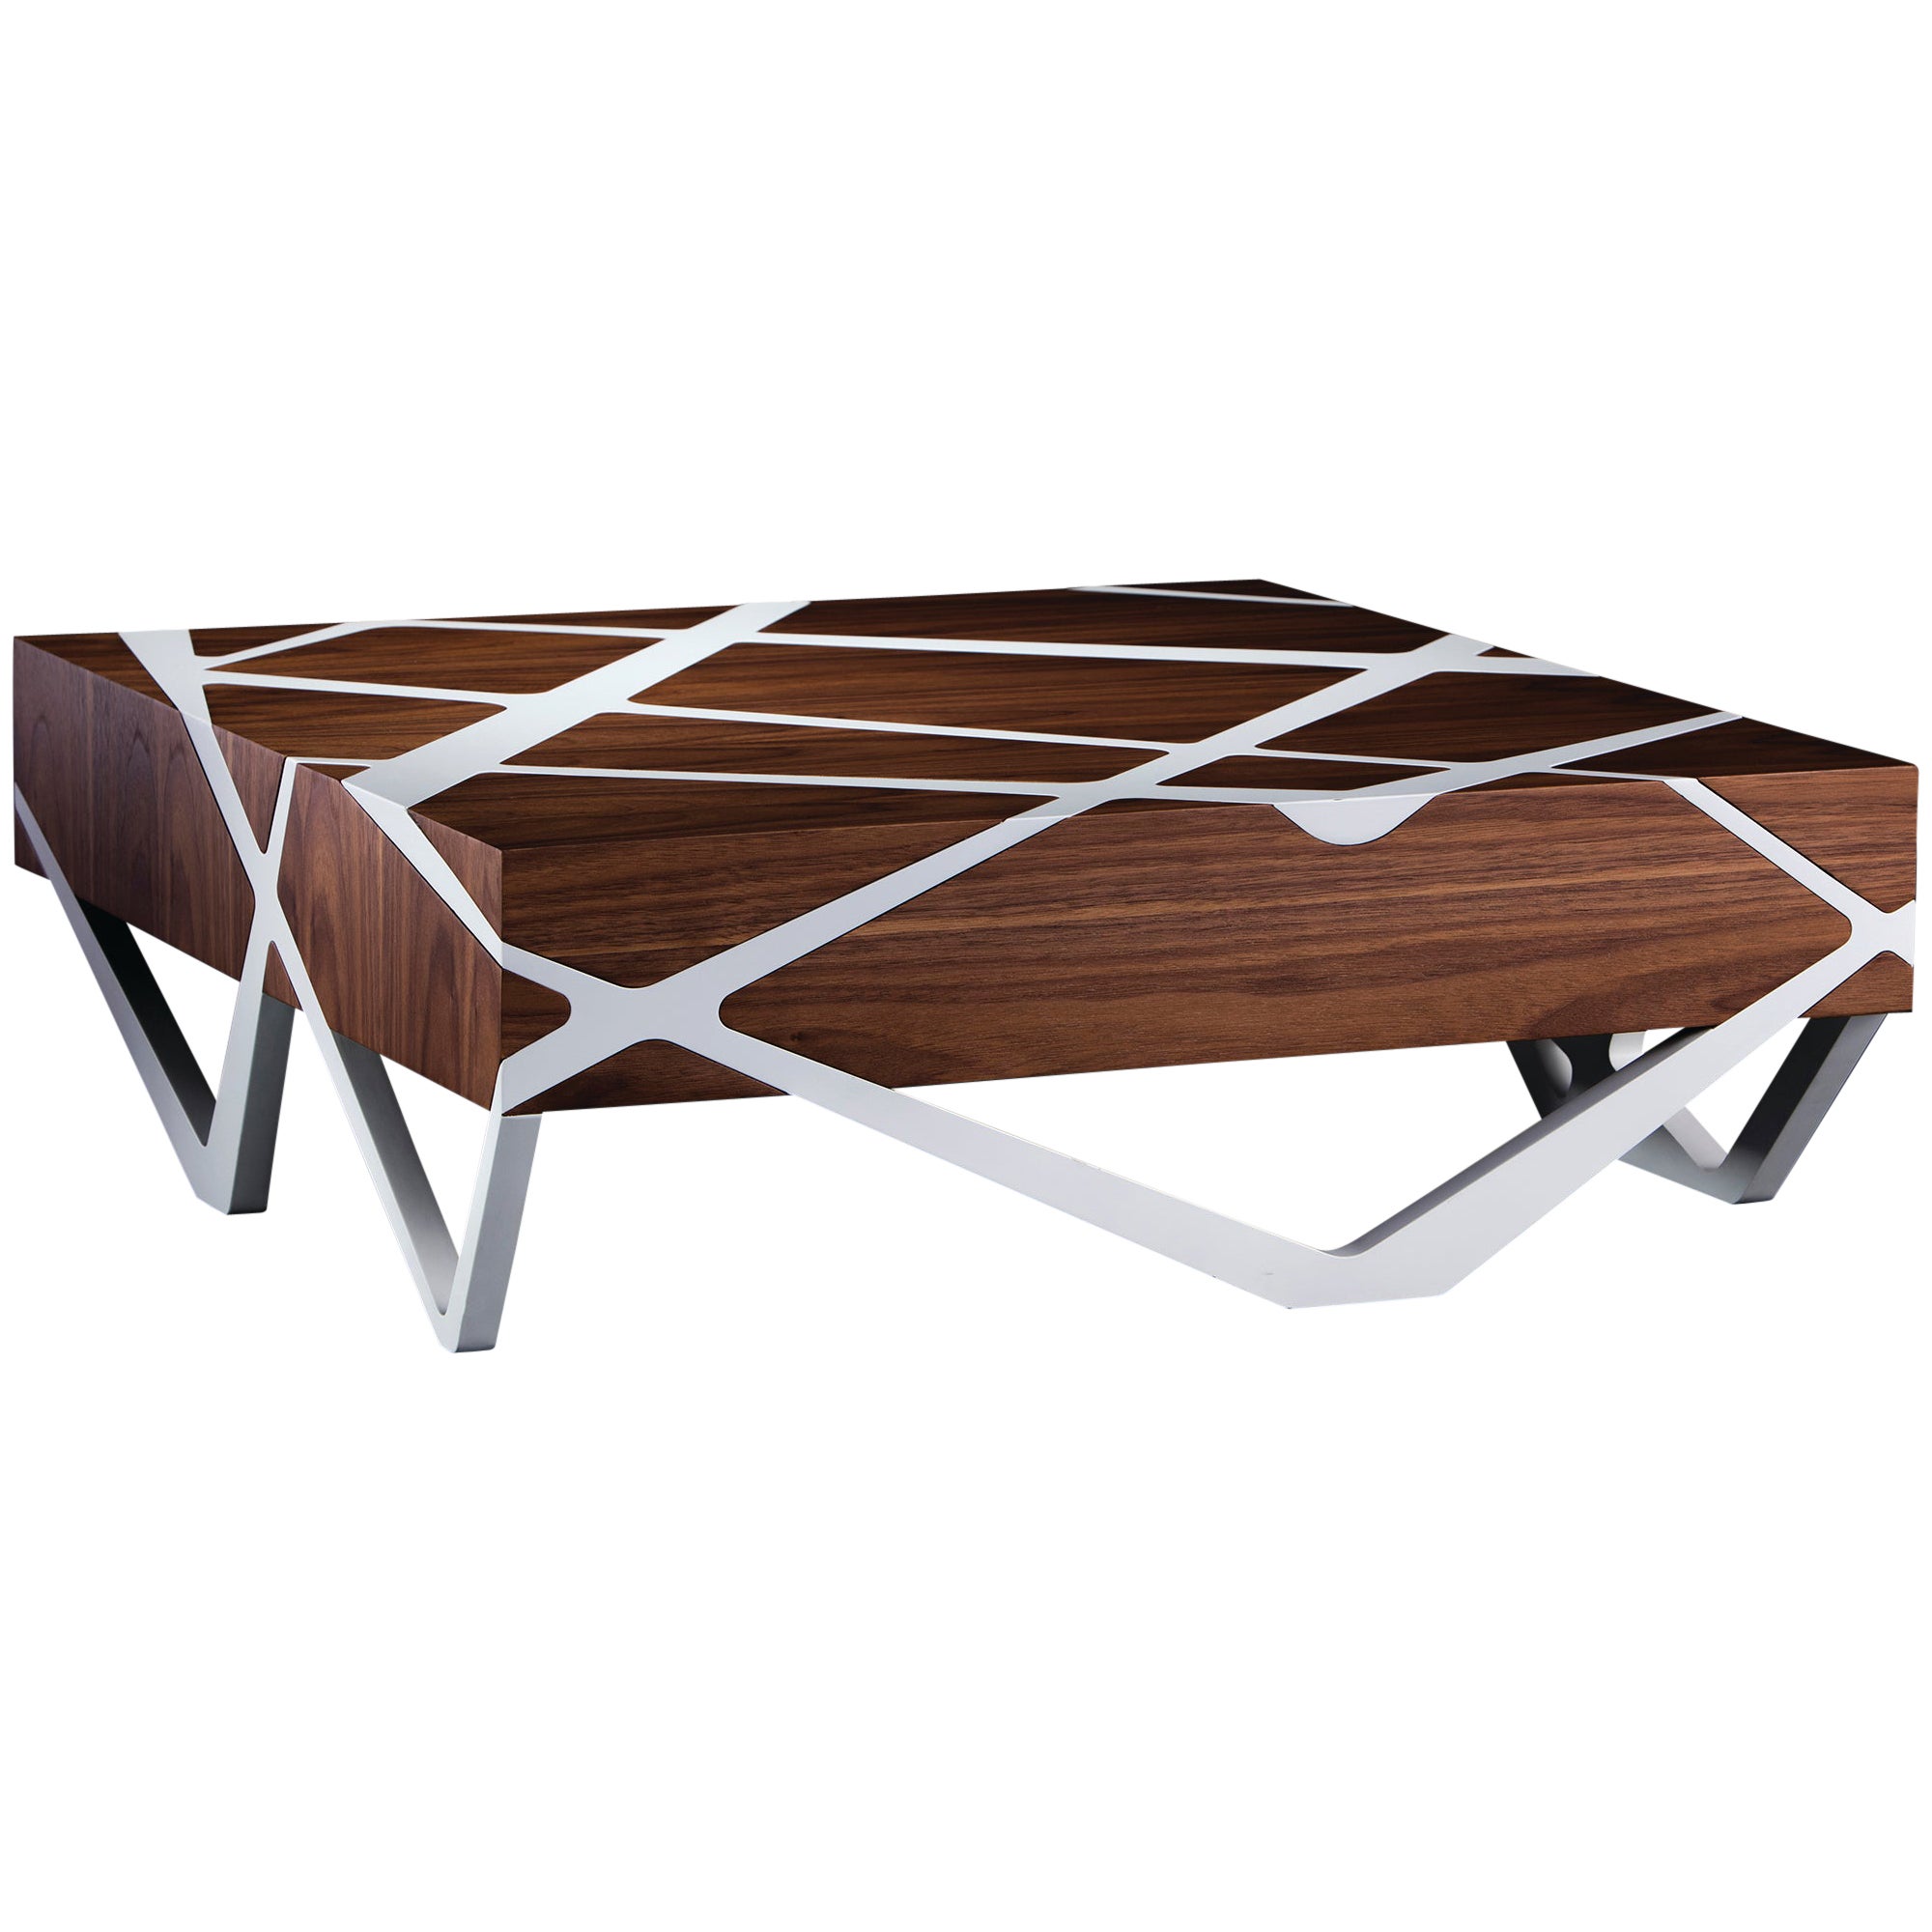 21st Century Modern Center Coffee Table in Walnut Wood and White Showroom Sample